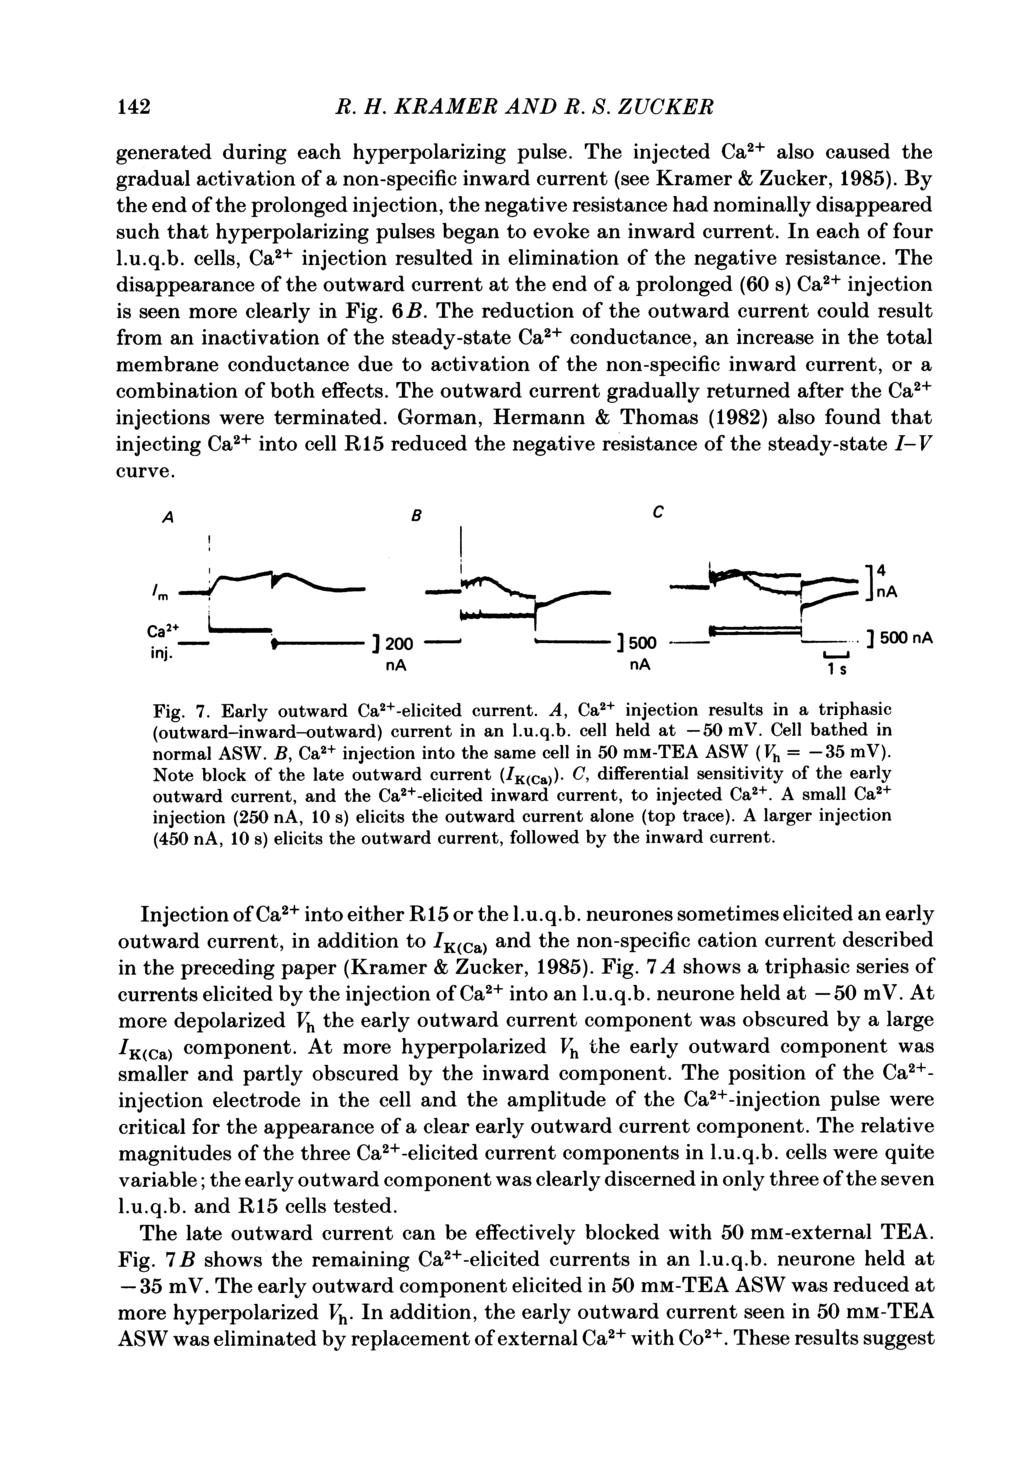 142 R. H. KRAMER AND R. S. ZUCKER generated during each hyperpolarizing pulse. The injected Ca2+ also caused the gradual activation of a non-specific inward current (see Kramer & Zucker, 1985).